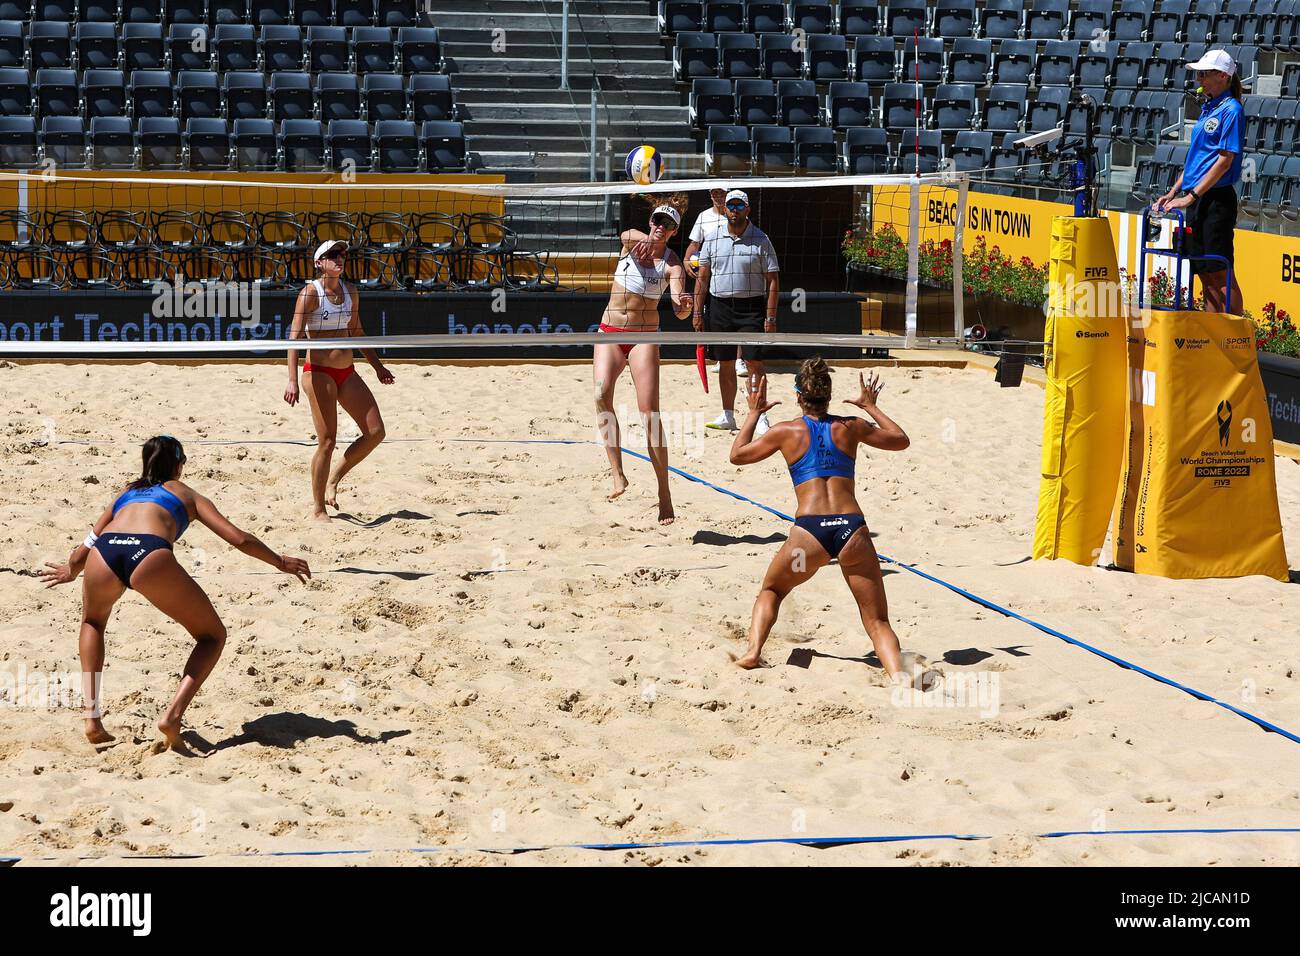 Flint/Cheng (USA) vs Cali/Tega (Italy) during the Beach Volley Beach Volleyball World Championships (day2) on June 11, 2022 at the Foro Italico in Rome, Italy (Photo by Luigi Mariani/LiveMedia/Sipa USA Stock Photo -